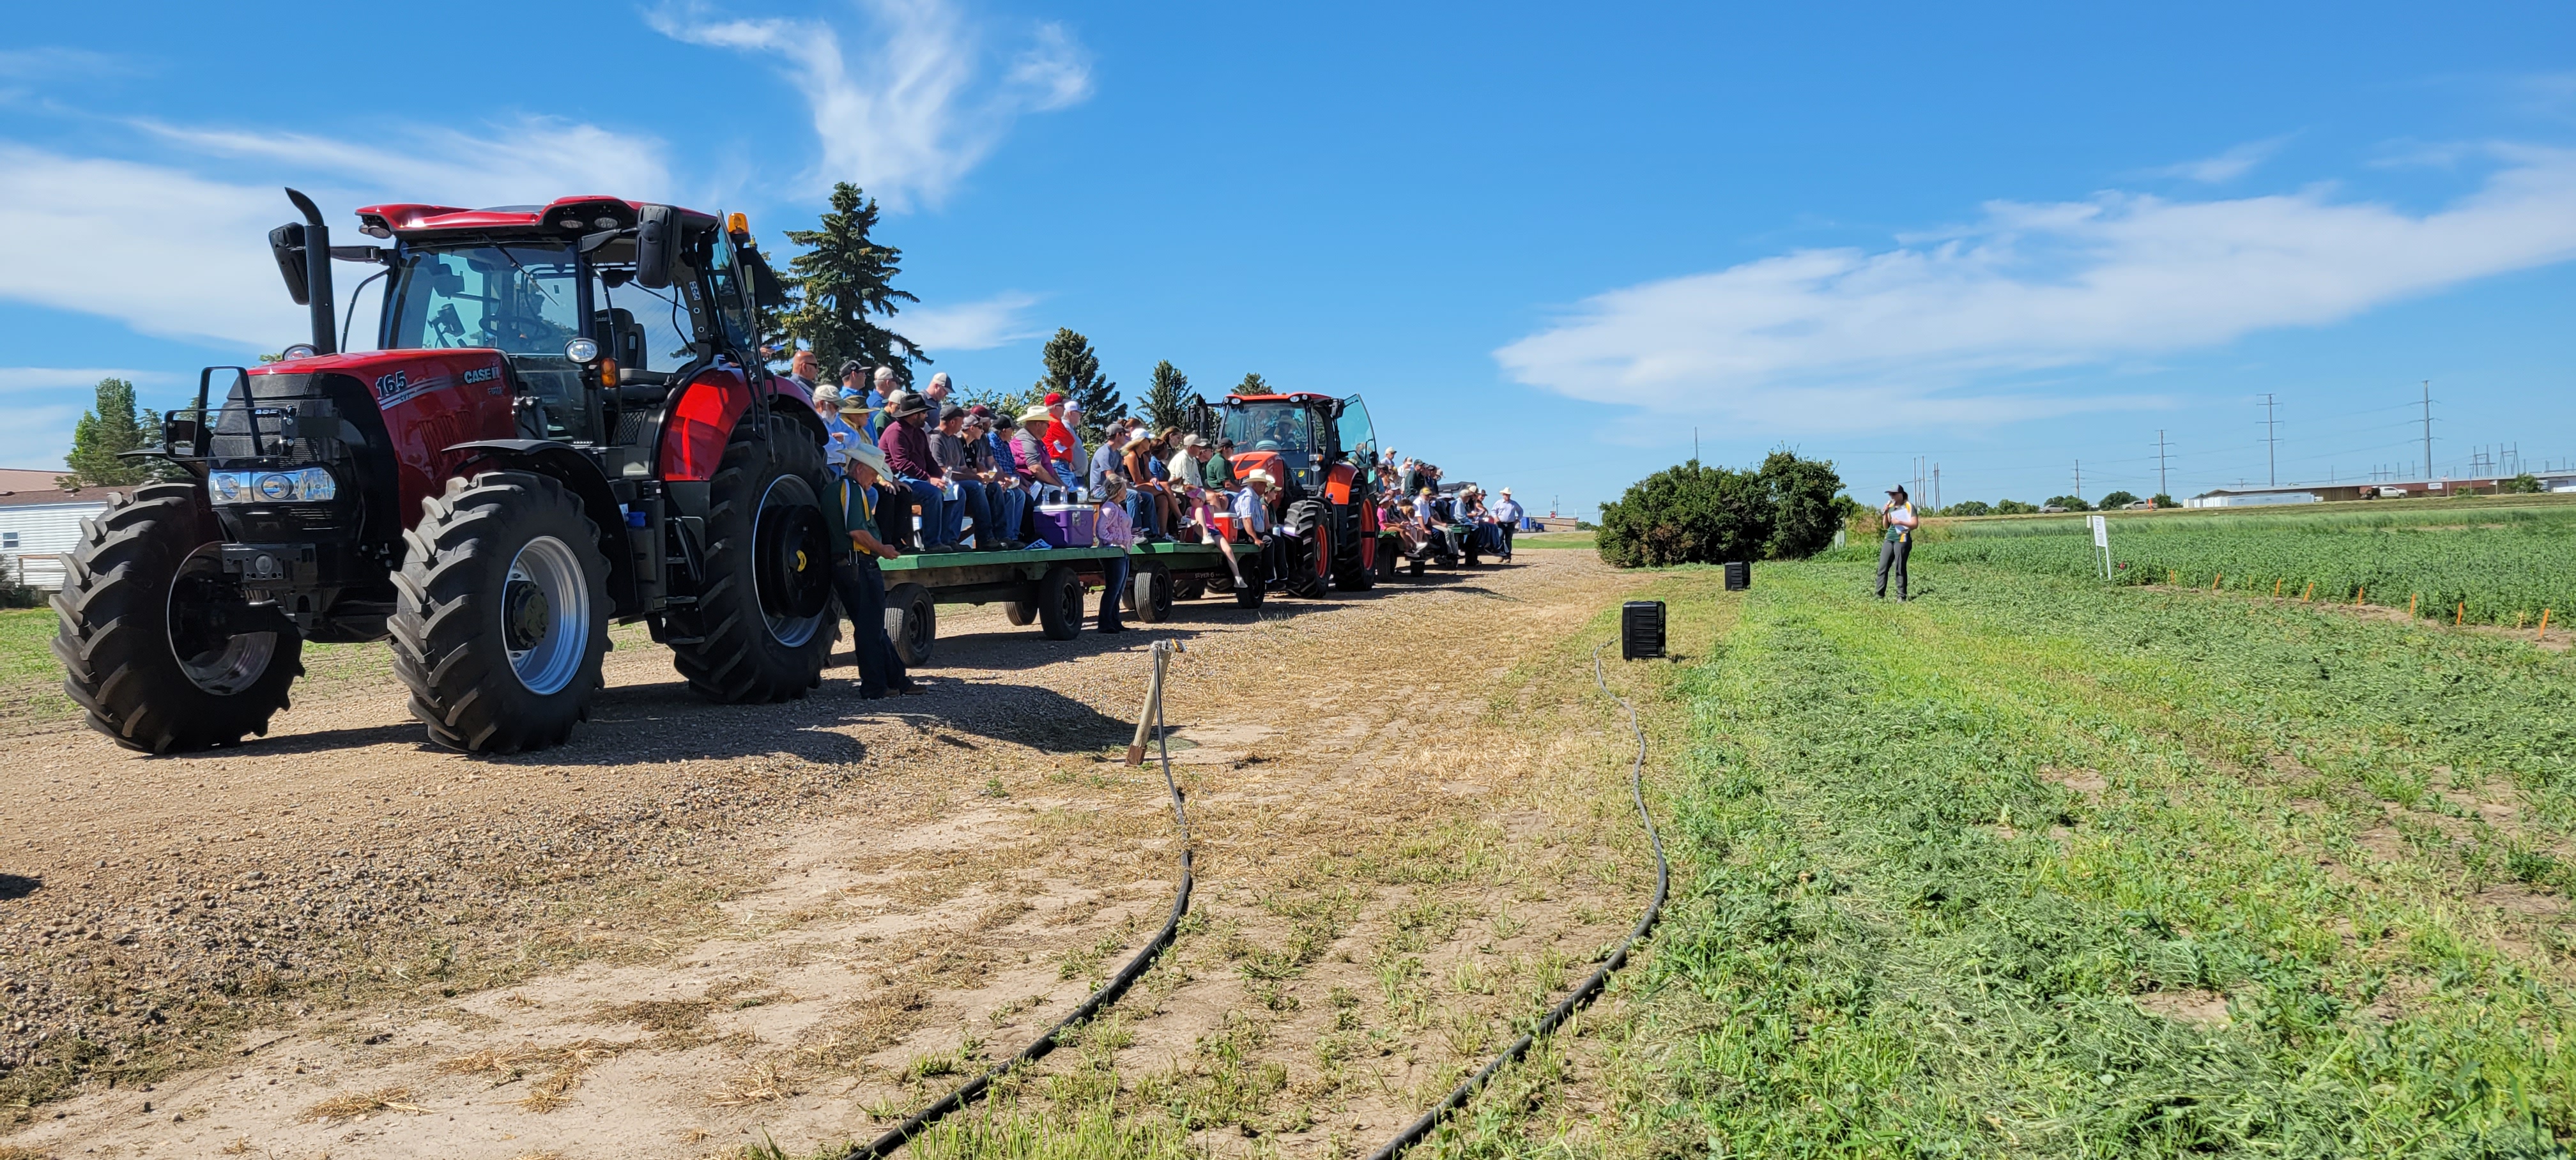 The WREC field days will offer opportunities to learn about the latest research in dryland agronomy, horticulture and irrigation topics. (NDSU photo)